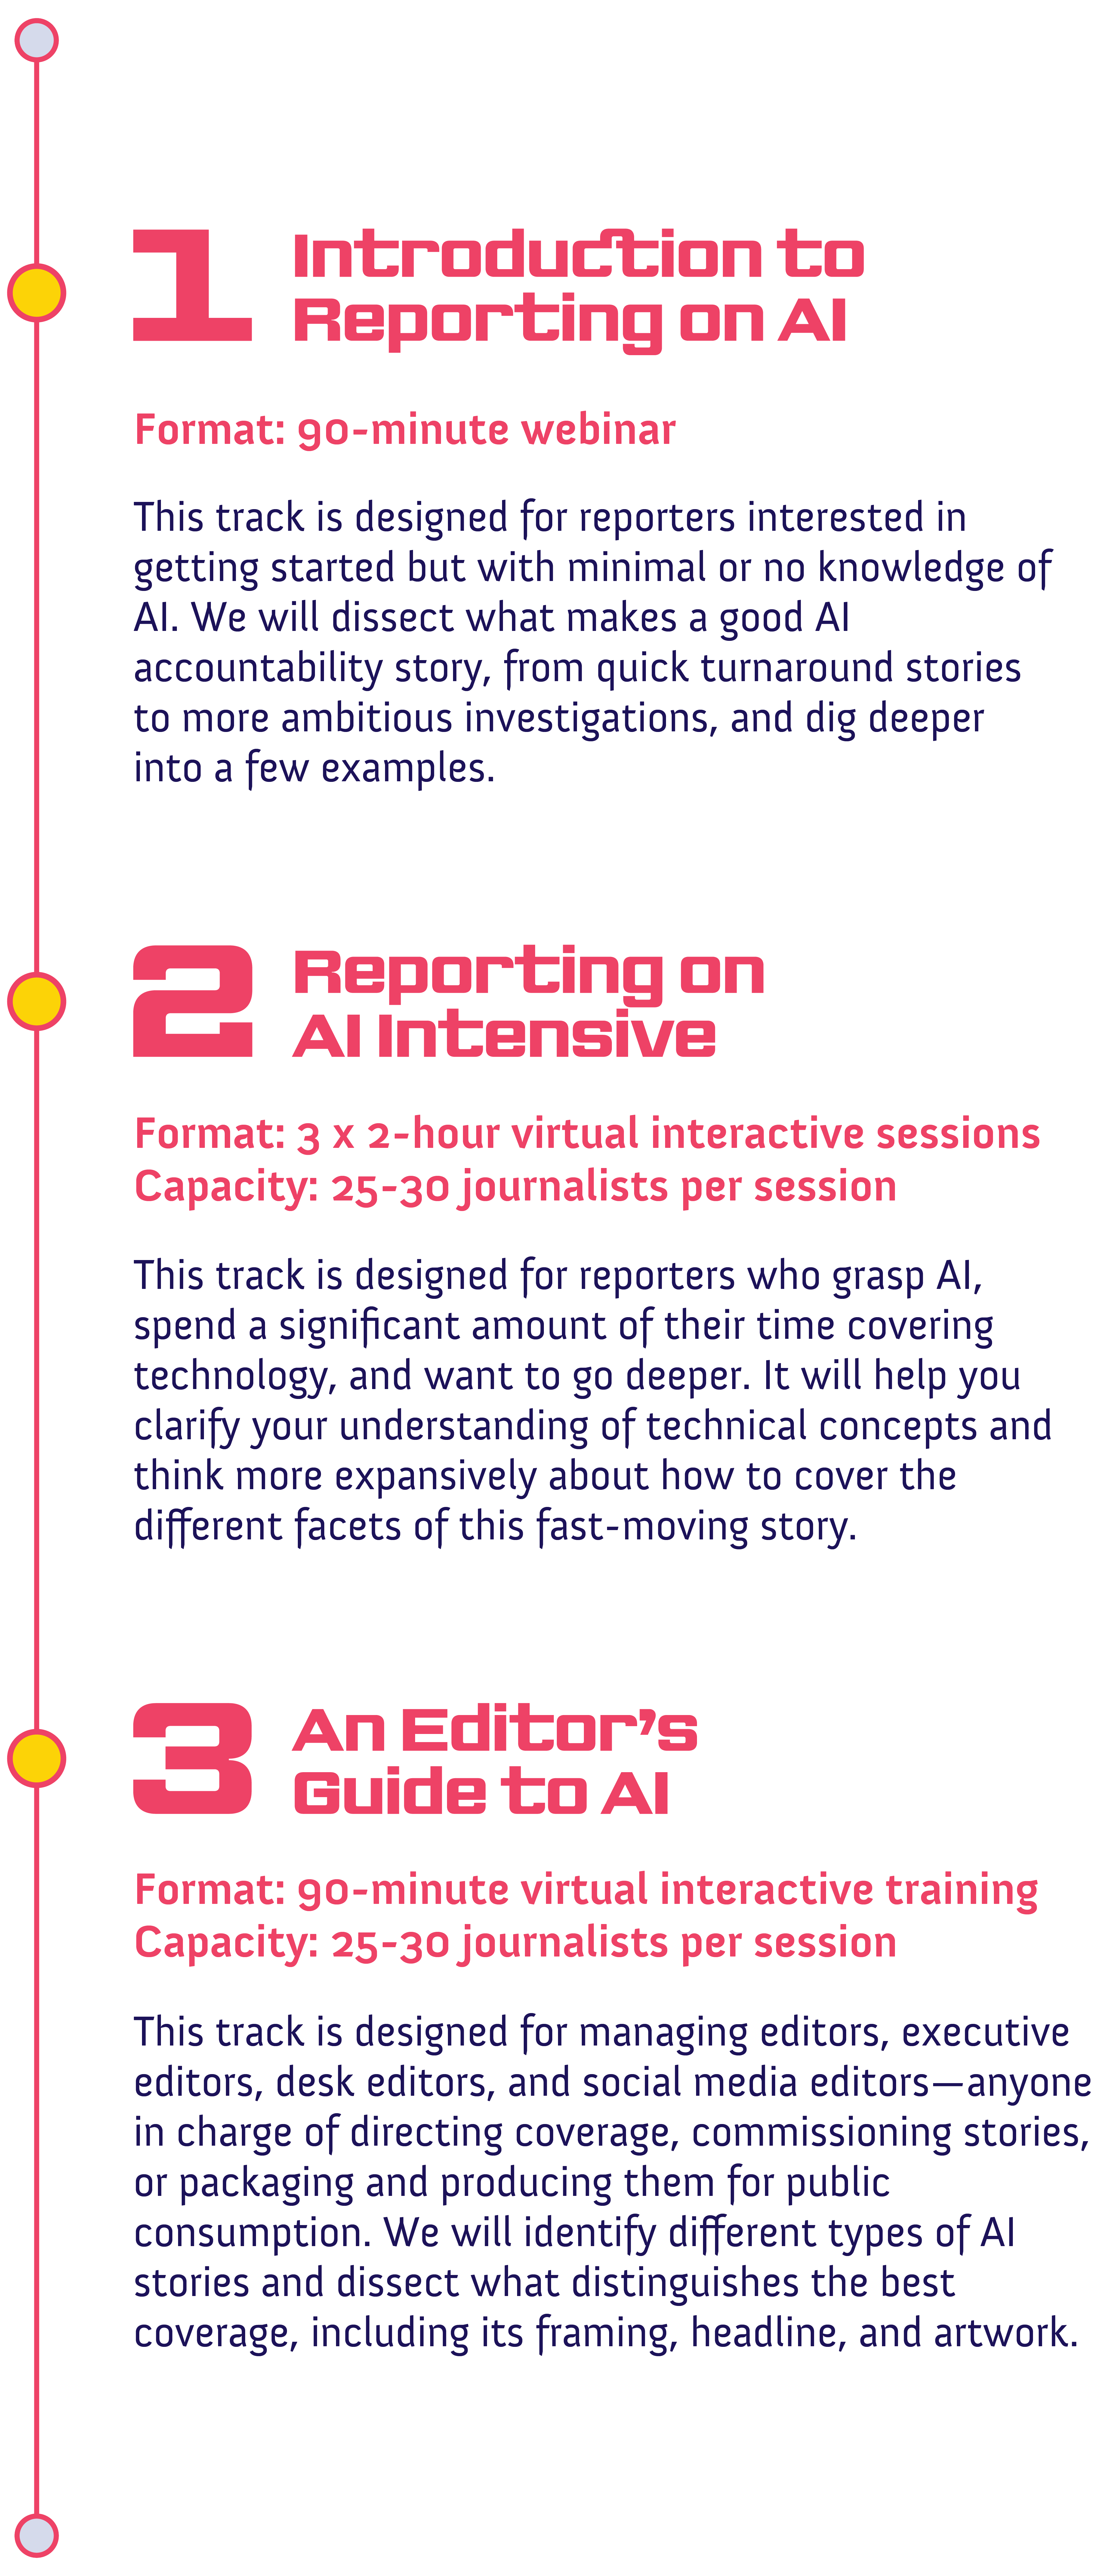 Track #1: Introduction to Reporting on AI<br />
Format: 90-minute, virtual webinar-style training</p>
<p>This track is designed for reporters interested in getting started but with minimal or no knowledge of AI. We will dissect what makes a good AI accountability story, from quick turnaround stories to more ambitious investigations, and dig deeper into a few examples.</p>
<p>Track #2: Reporting on AI Intensive<br />
Format: 3 x 2-hour virtual interactive sessions<br />
Capacity: 25-30 journalists per session</p>
<p>This track is designed for reporters who grasp AI, spend a significant amount of their time covering technology, and want to go deeper. It will help you clarify your understanding of technical concepts and think more expansively about how to cover the different facets of this fast-moving story.</p>
<p>Track #3: An Editor's Guide to AI<br />
Format: 90-minute virtual interactive training<br />
Capacity: 25-30 journalists per session</p>
<p>This track is designed for managing editors, executive editors, desk editors, and social media editors—anyone in charge of directing coverage, commissioning stories, or packaging and producing them for public consumption. We will identify different types of AI stories and dissect what distinguishes the best coverage, including its framing, headline, and artwork.